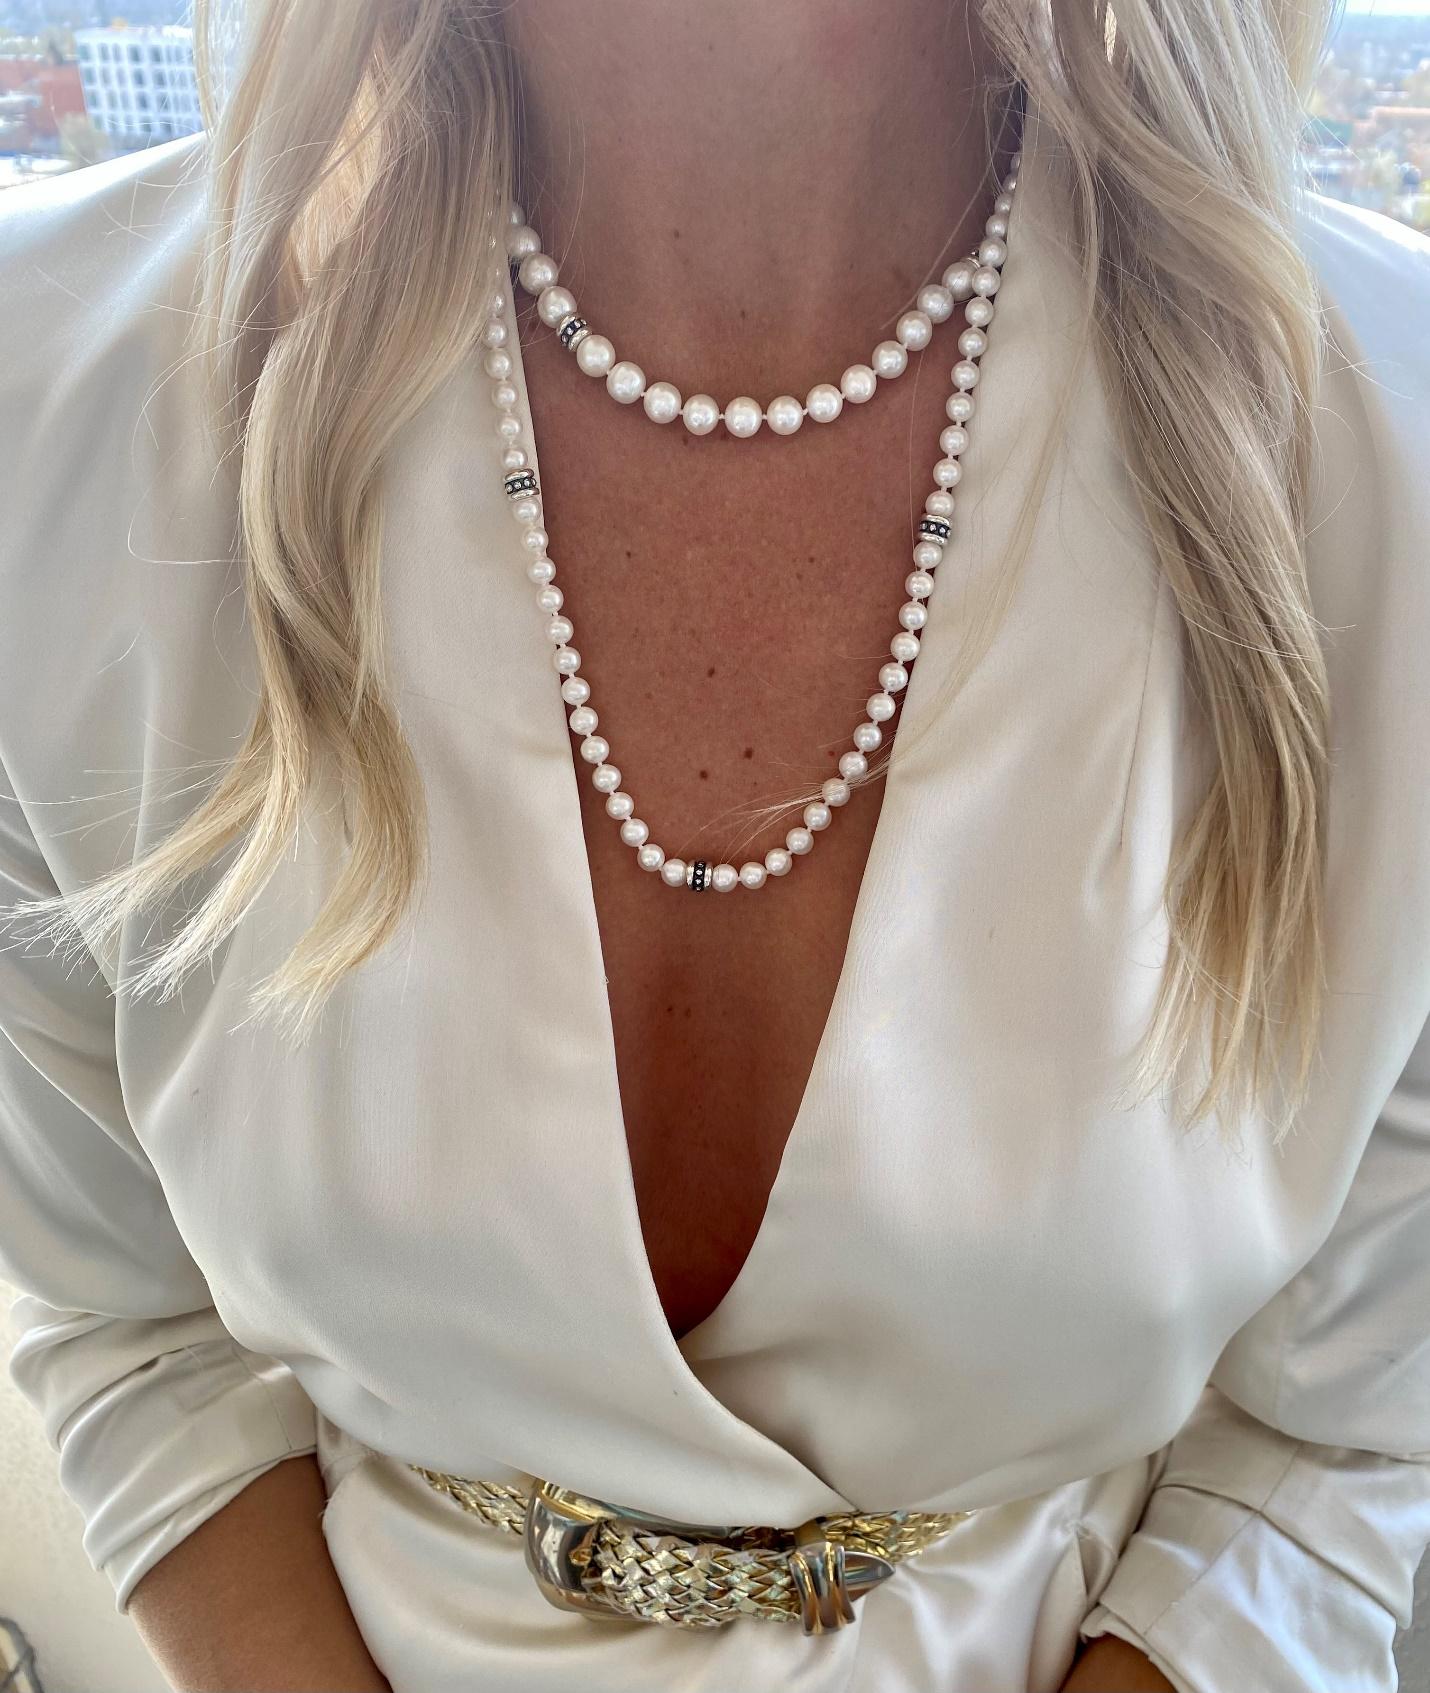 Summer Jewelry Trends 2023: Freshwater Pearls, Steel and Colors